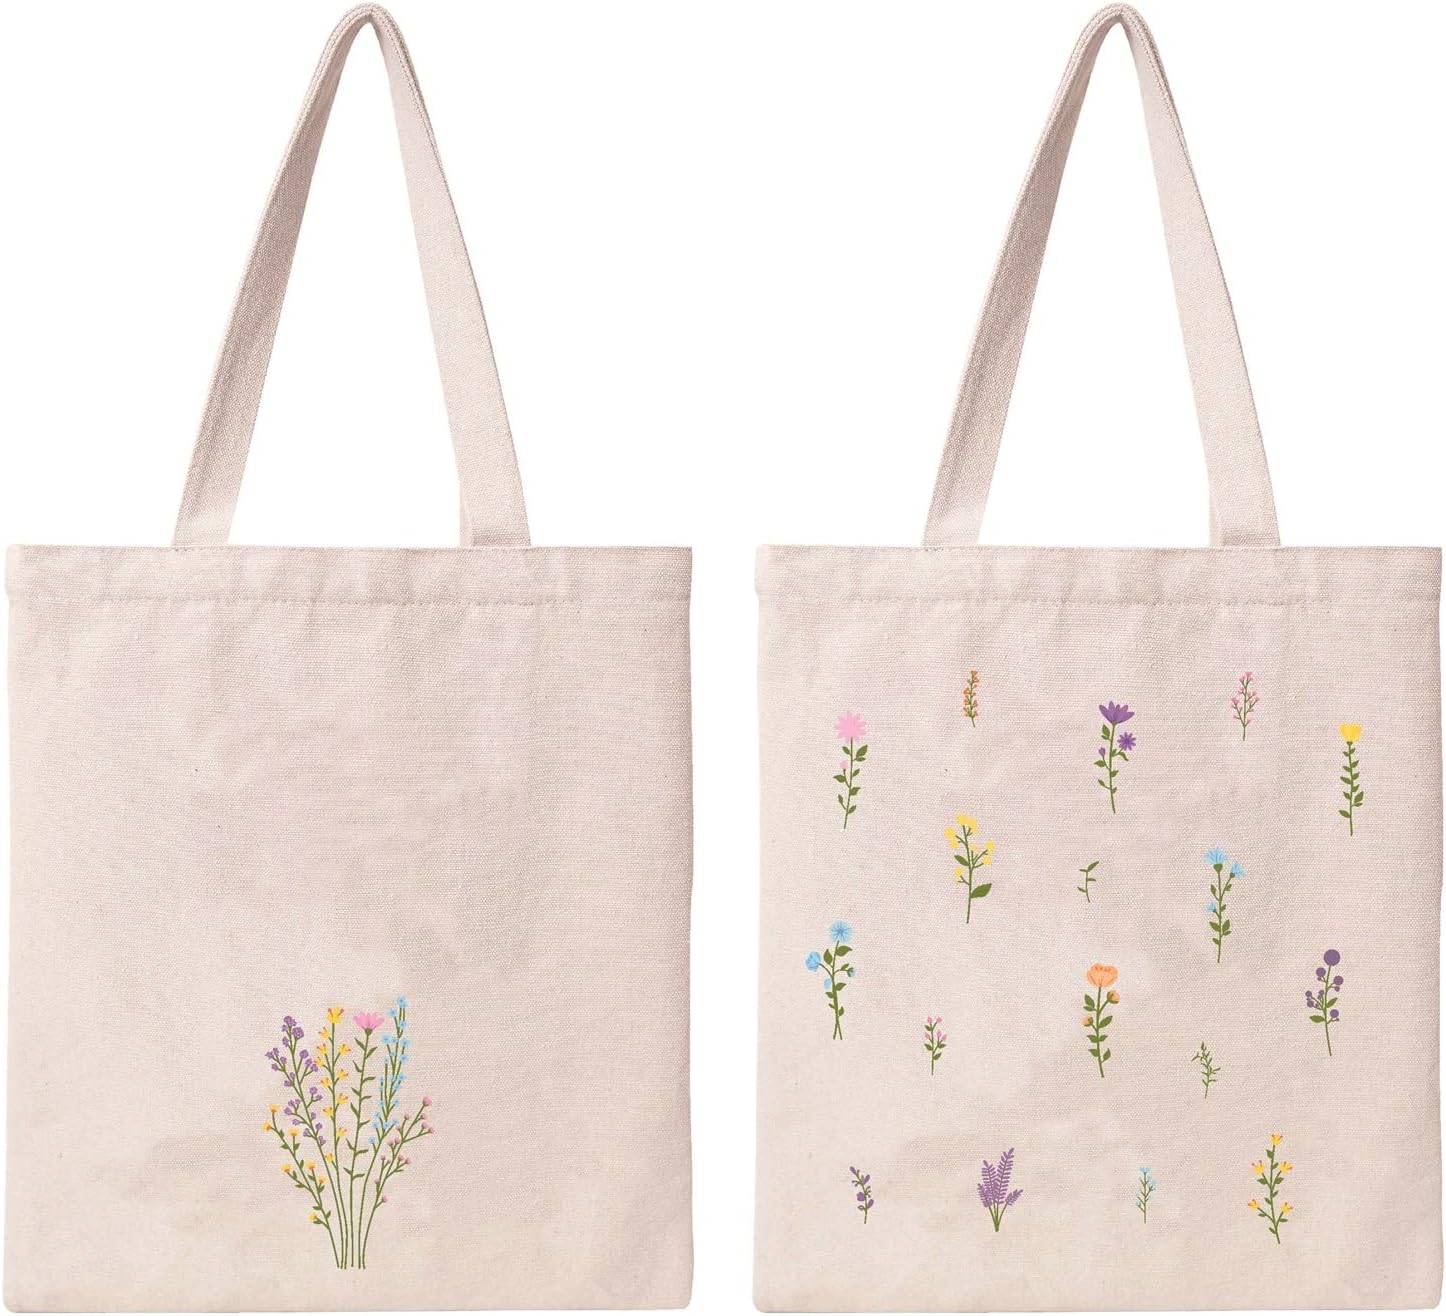 Floral Cotton Canvas Tote Bag Minimalist Bouquet Aesthetic Tote Bag Reusable Canvas Shopping Wildflower Botanical Flower Tote Bag